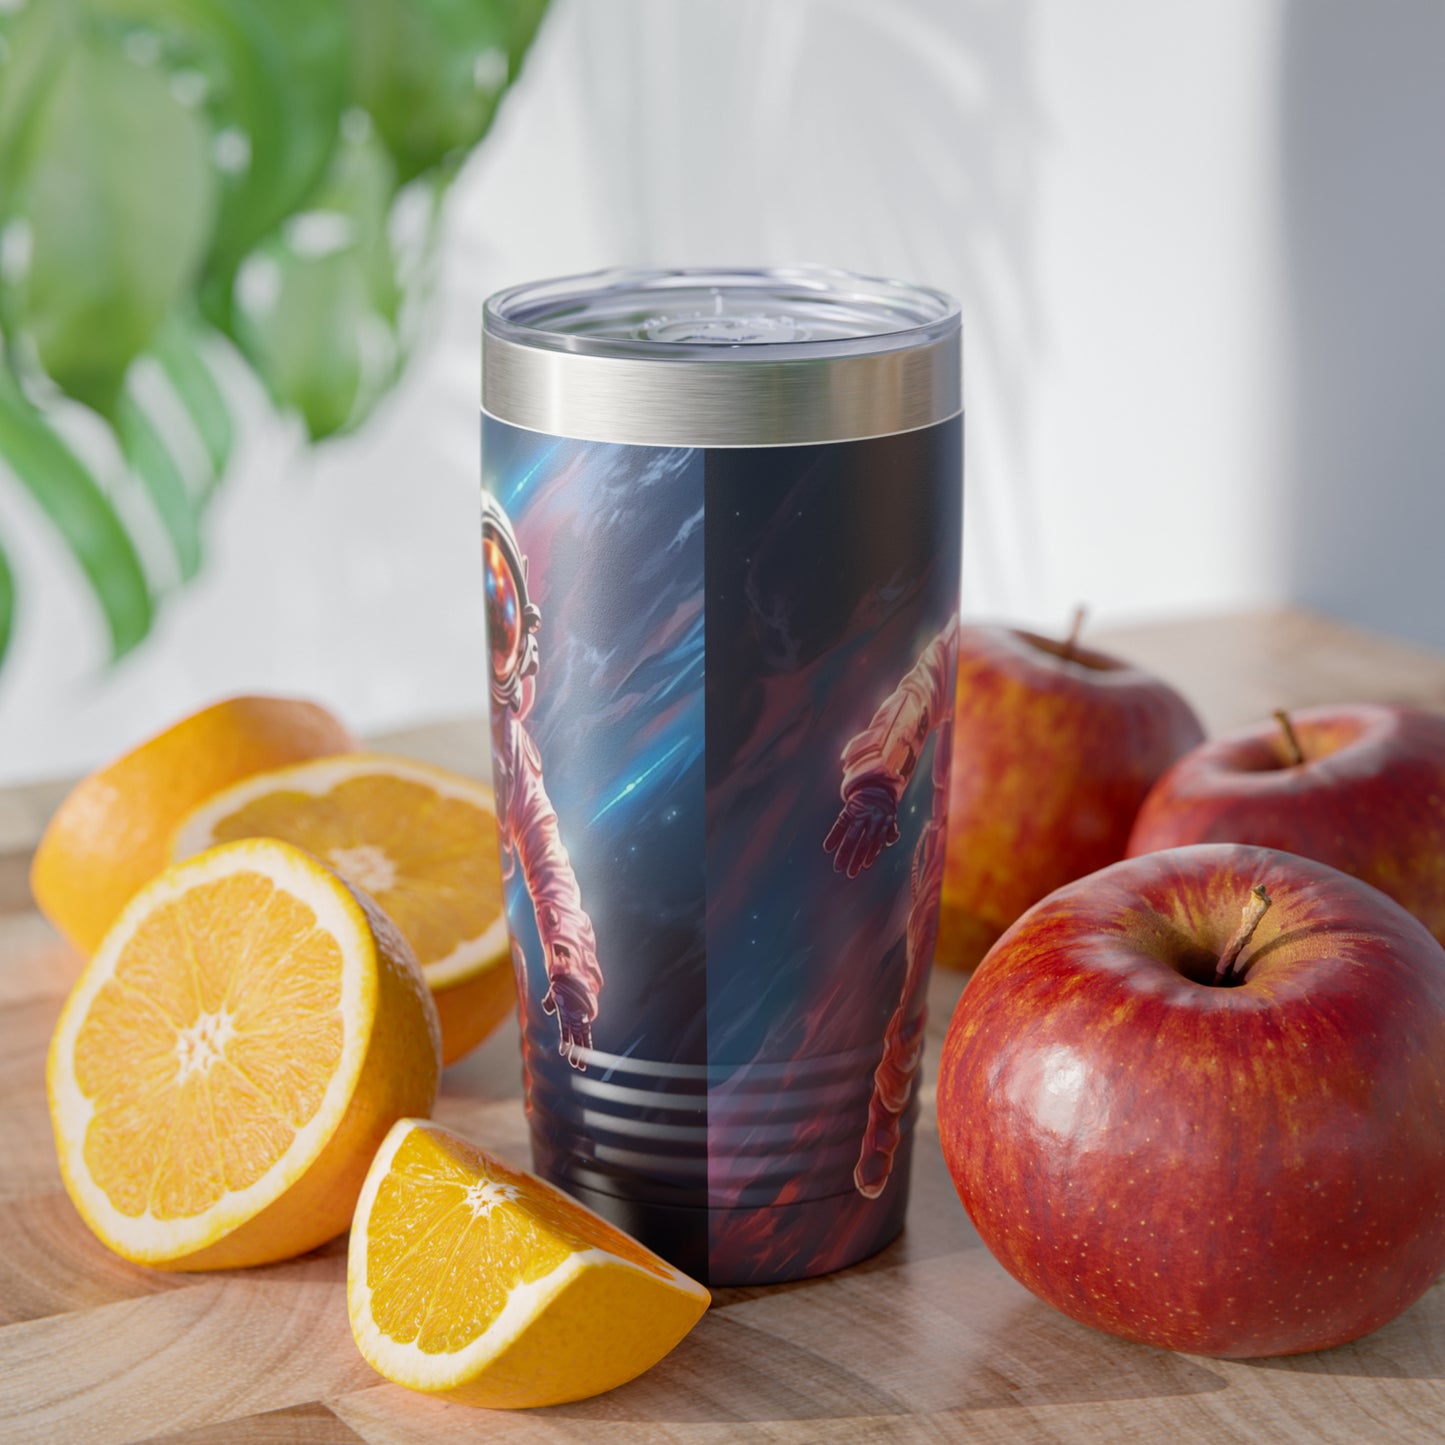 Astronaut Outer Space - Galaxy Starfield - Ringneck Tumbler, 20oz